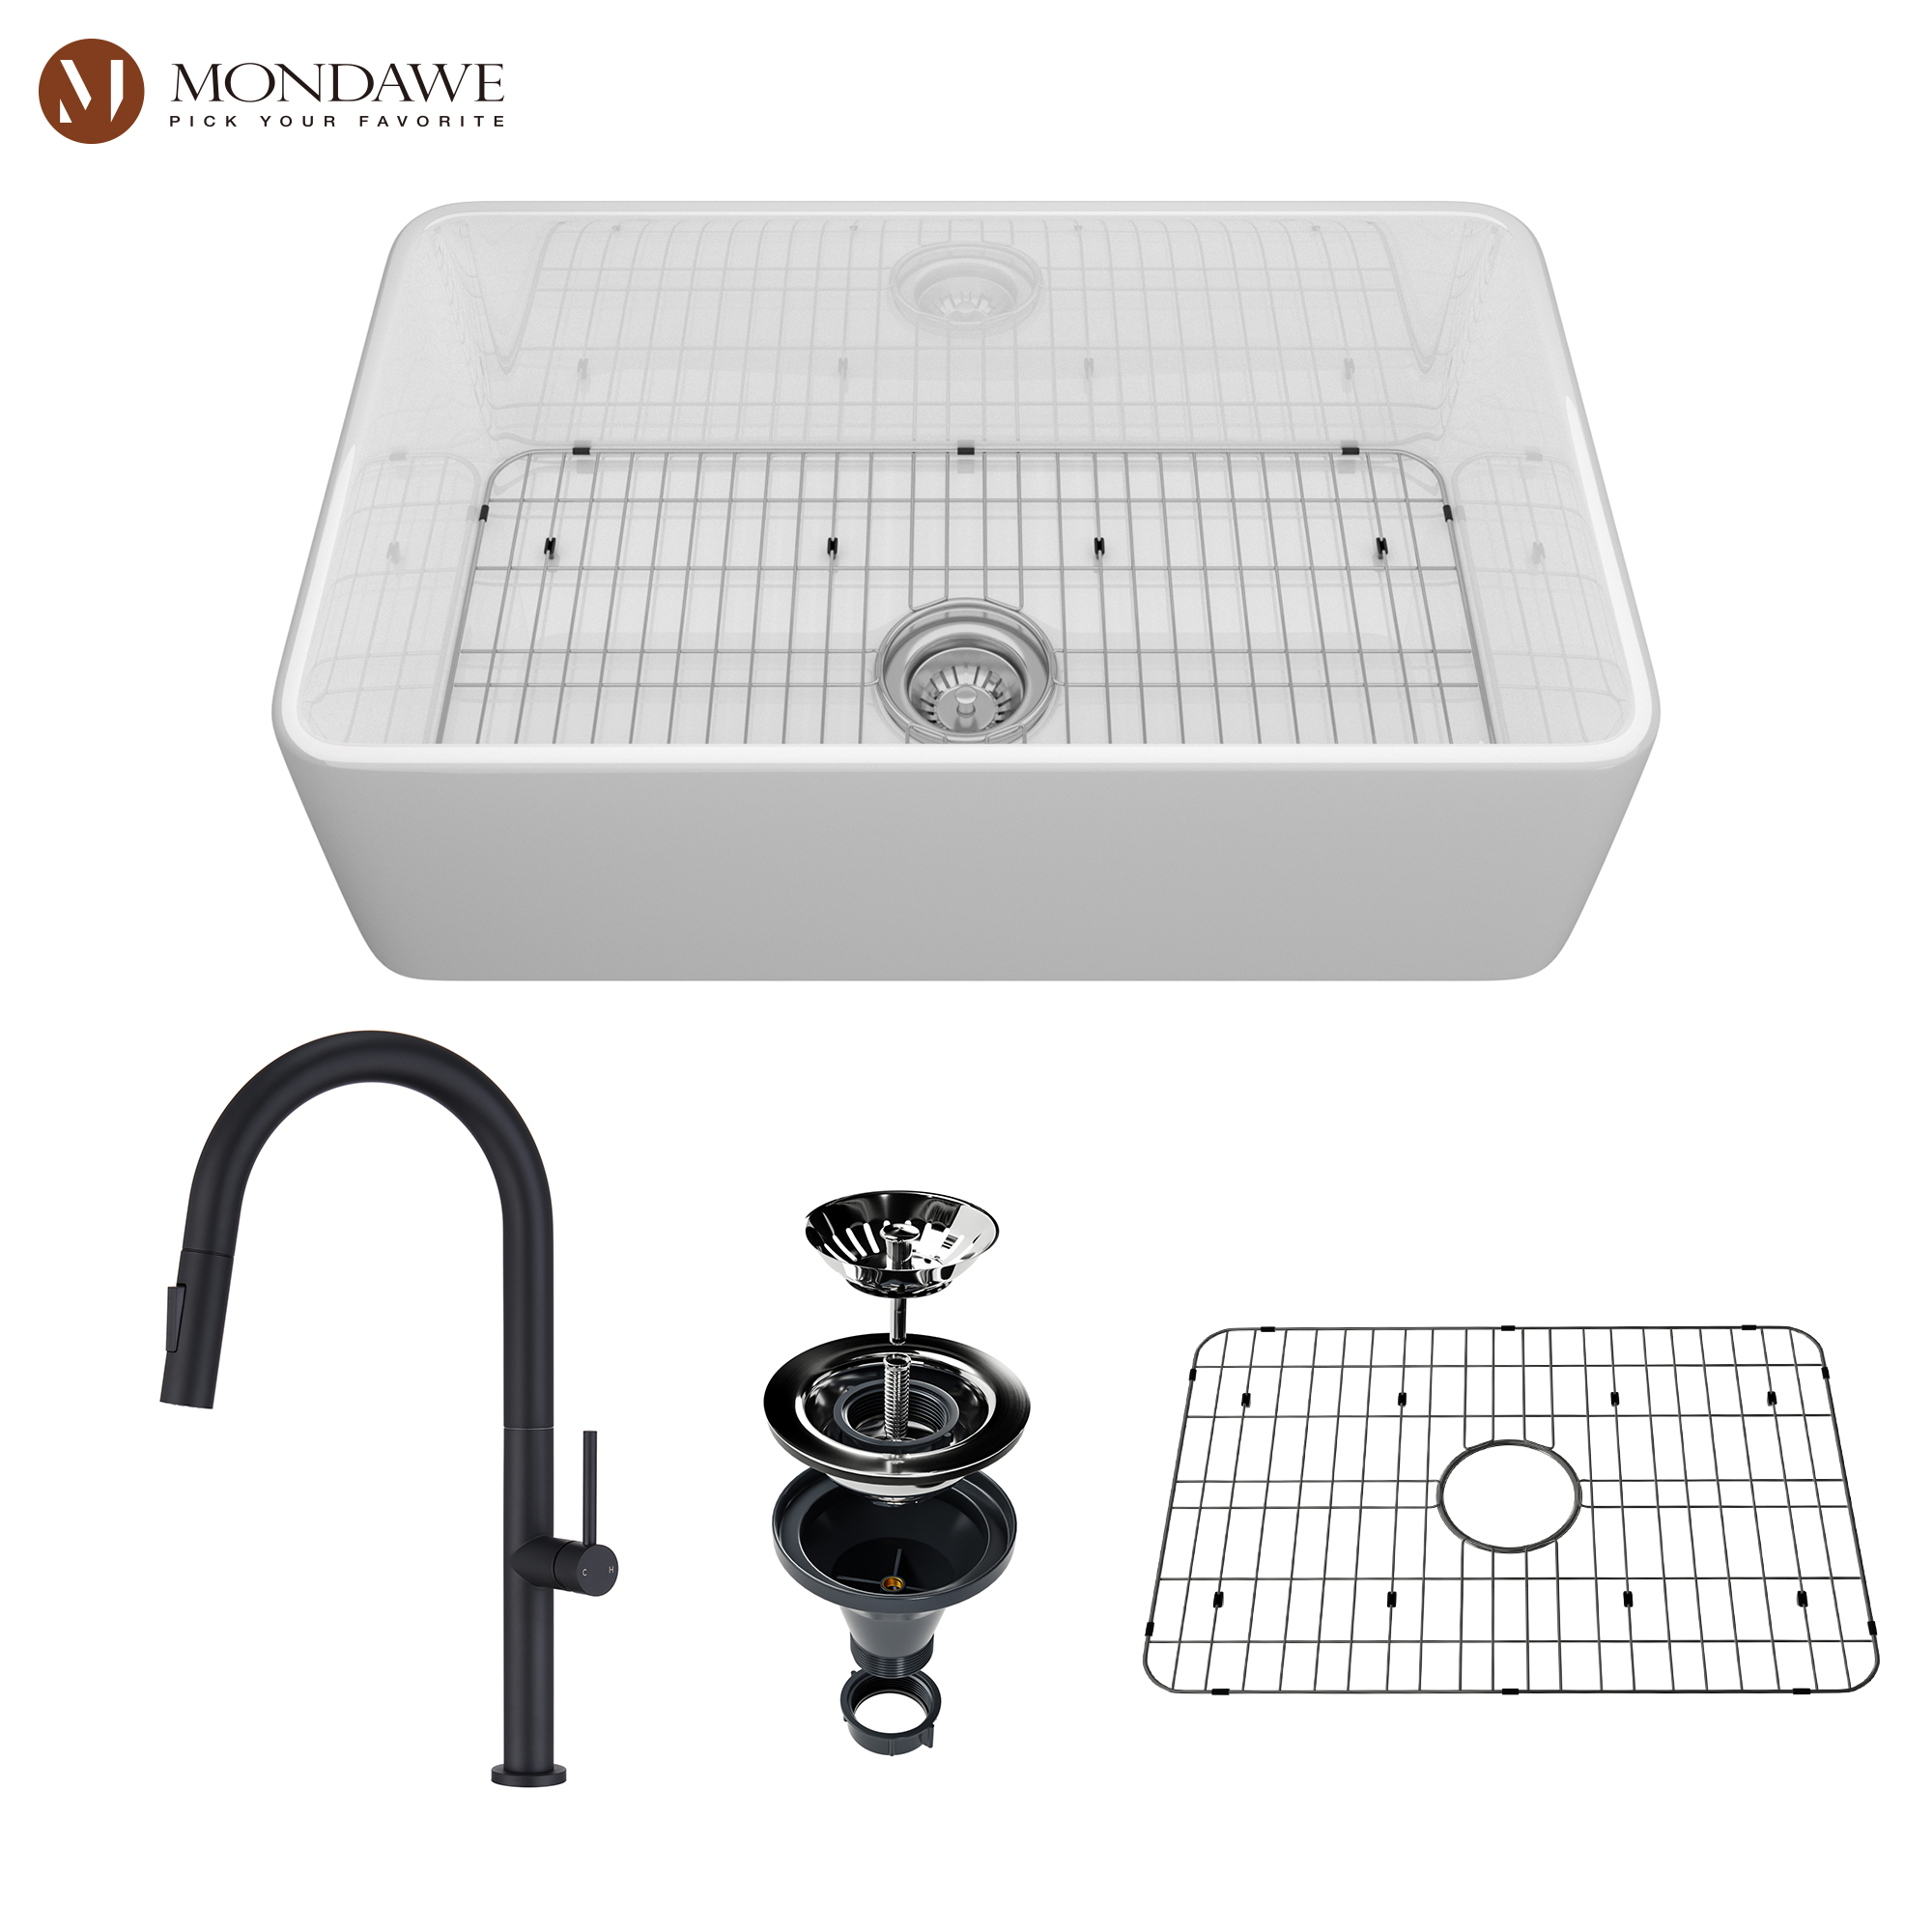 Farmhouse 30 in. single bowl fireclay kitchen sink in white comes with pull-down faucet-Mondawe